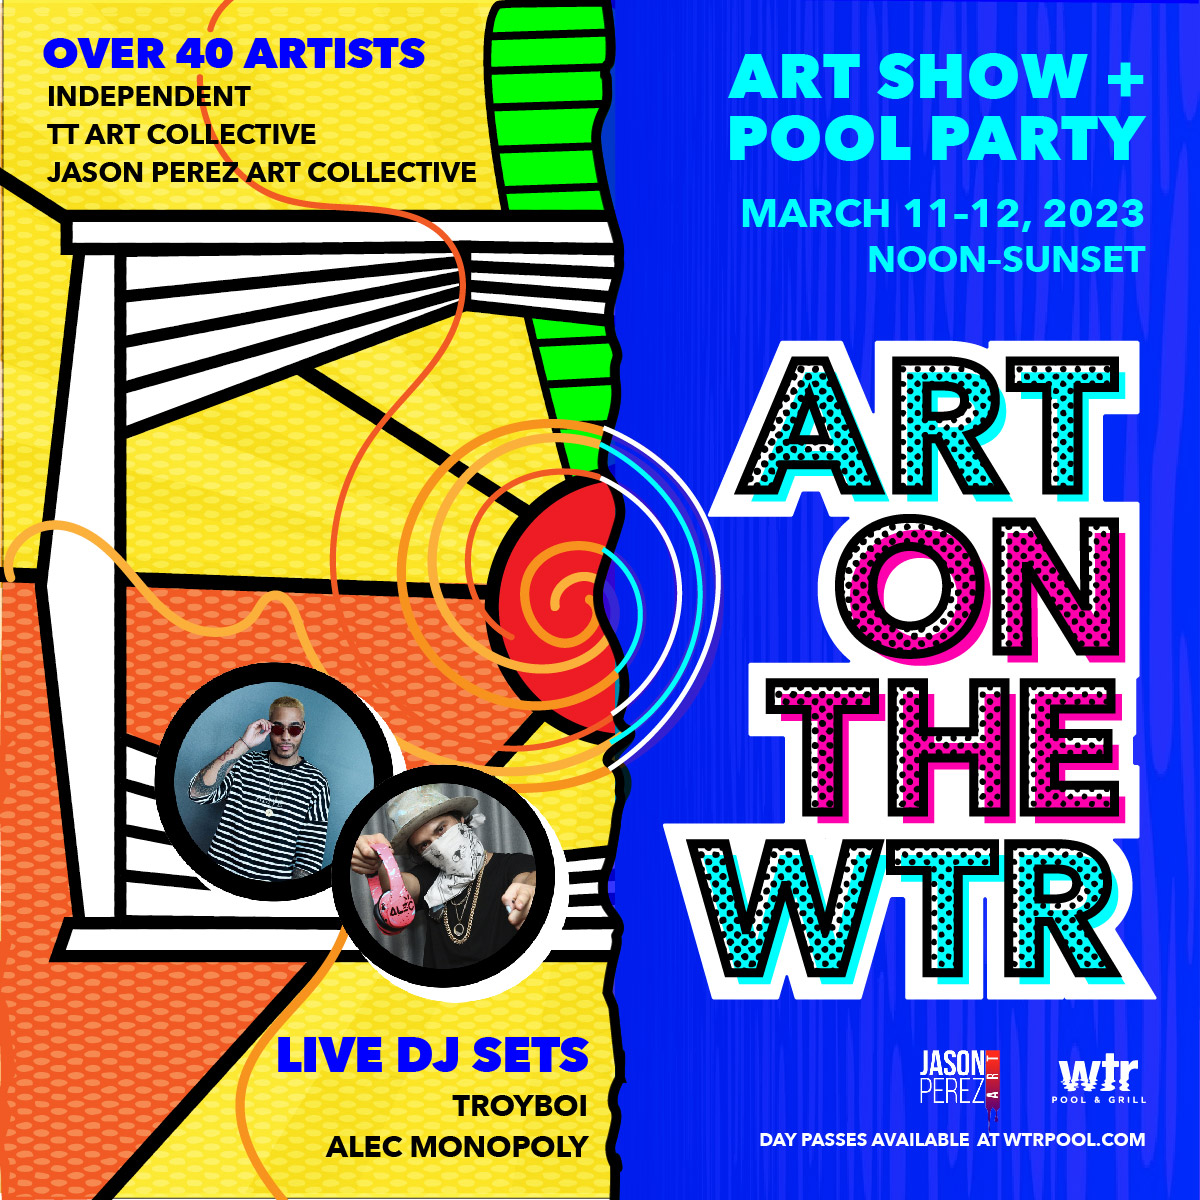 Tampa Bay’s WTR Pool to Host Art Show this Spring